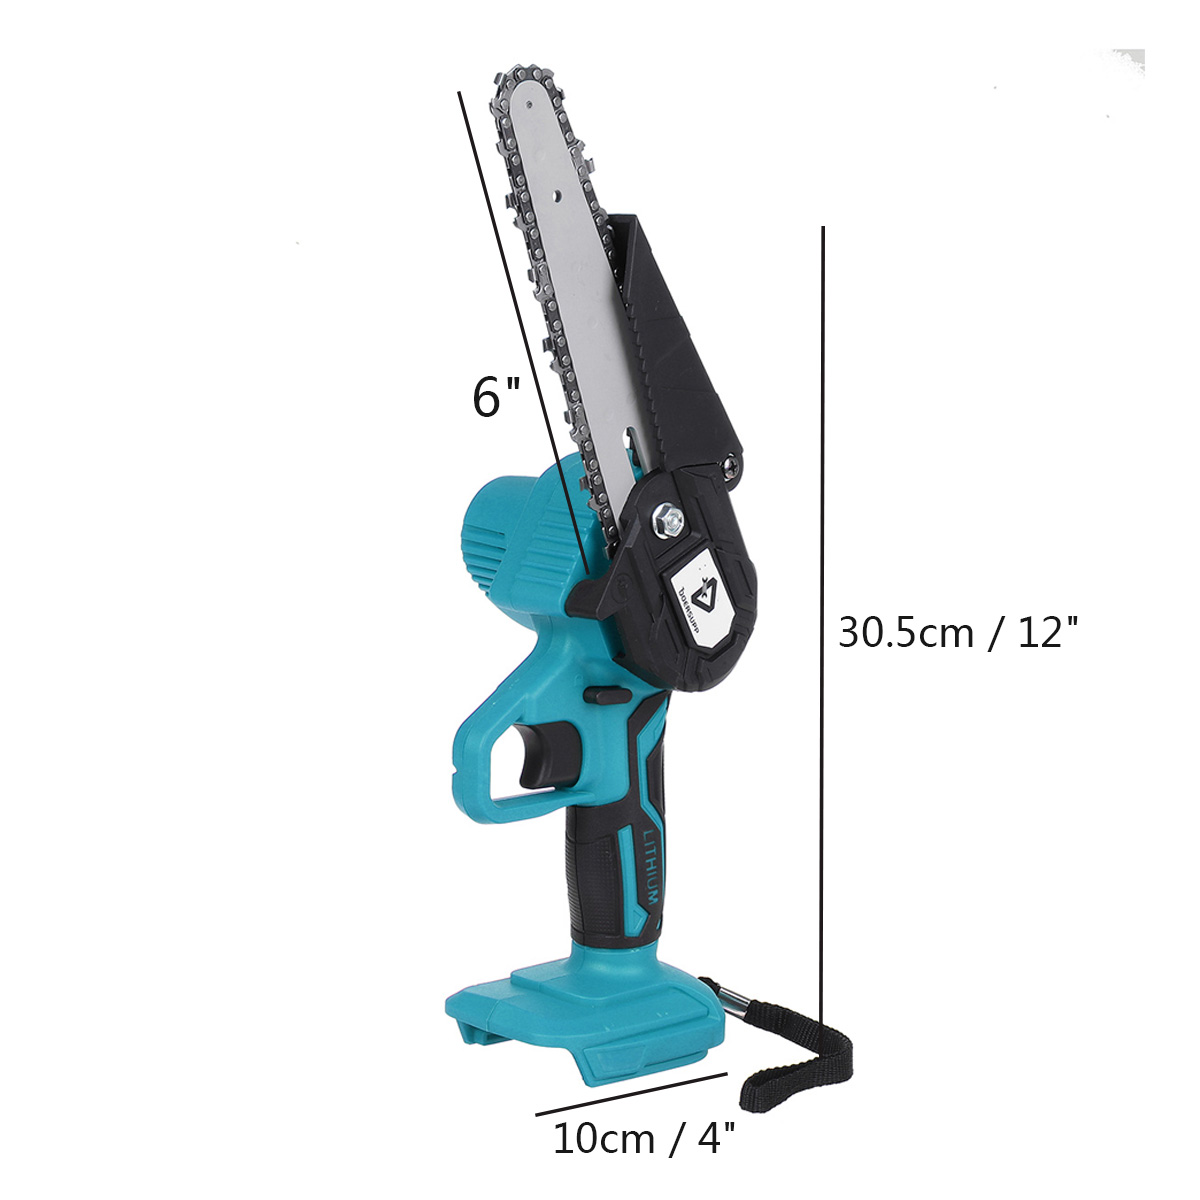 Doersupp-6-Inch-Cordless-Electric-Chain-Saw-Chainsaw-3000W-Mini-Woodworking-Wood-Cutter-One-Hand-Saw-1847597-12